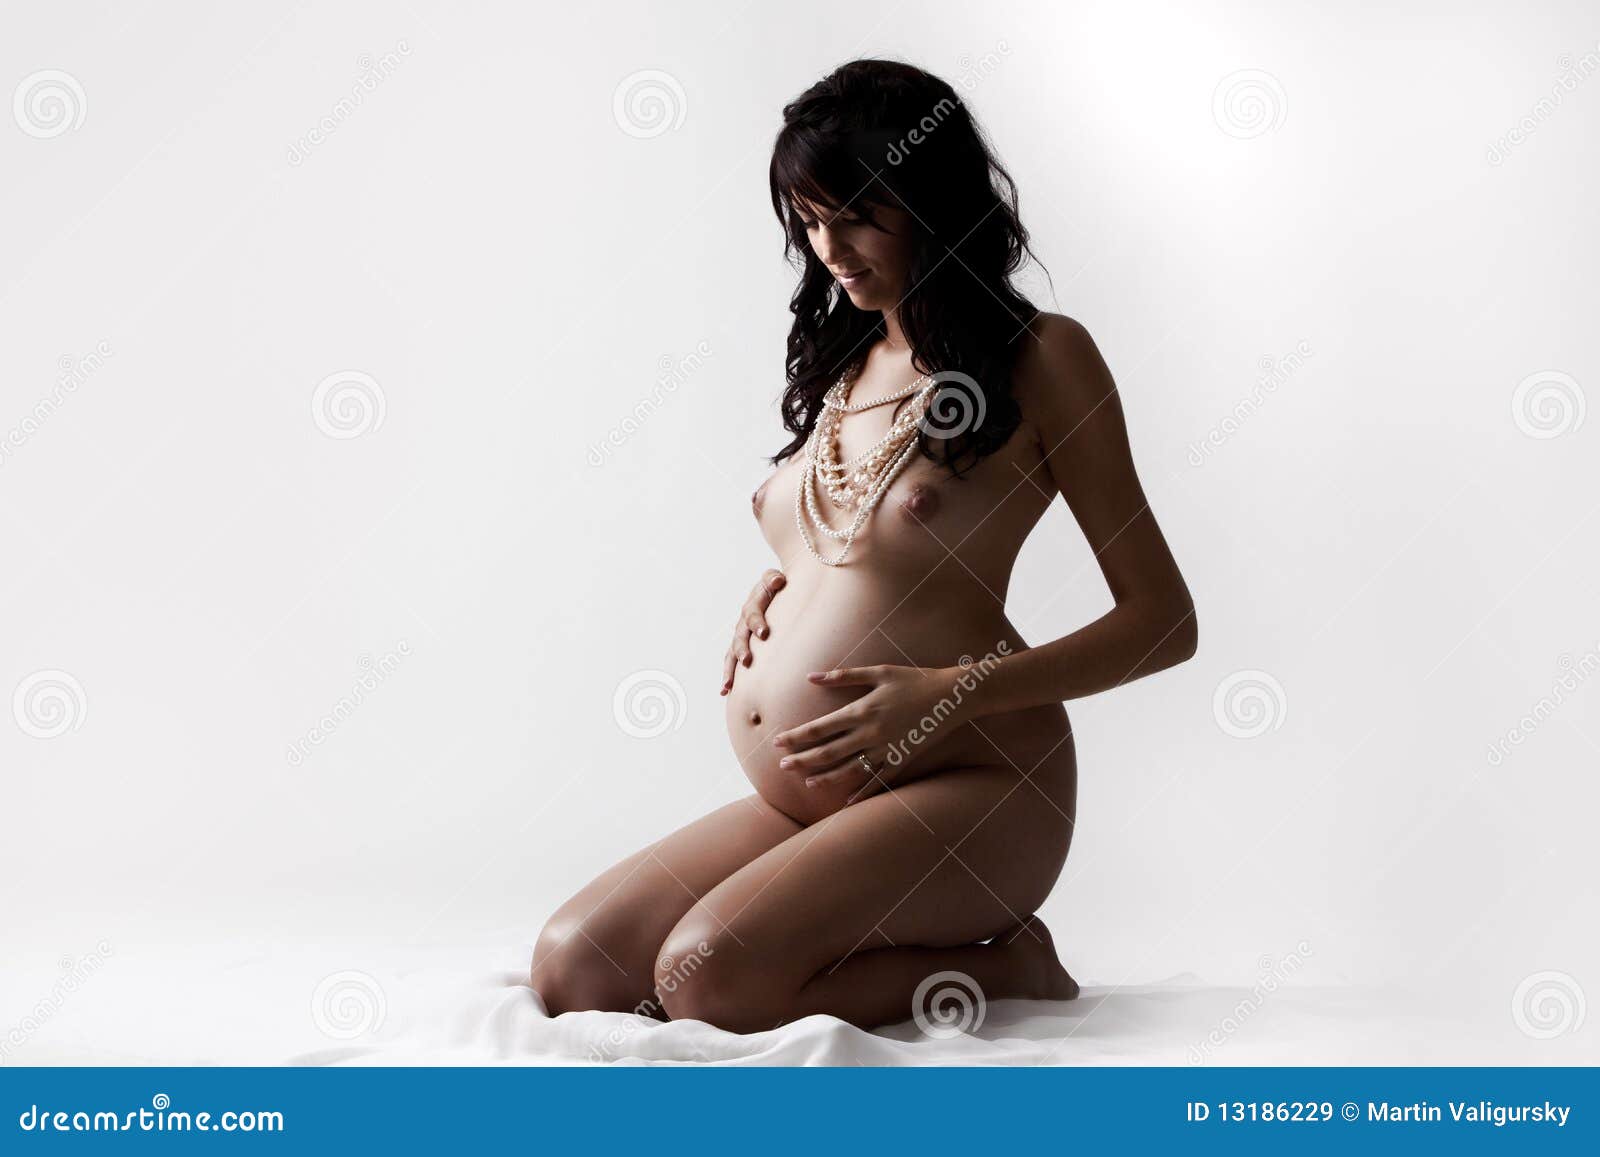  pregnant woman nude Nude pregnant woman at 38 weeks lying on the floor Stock ...